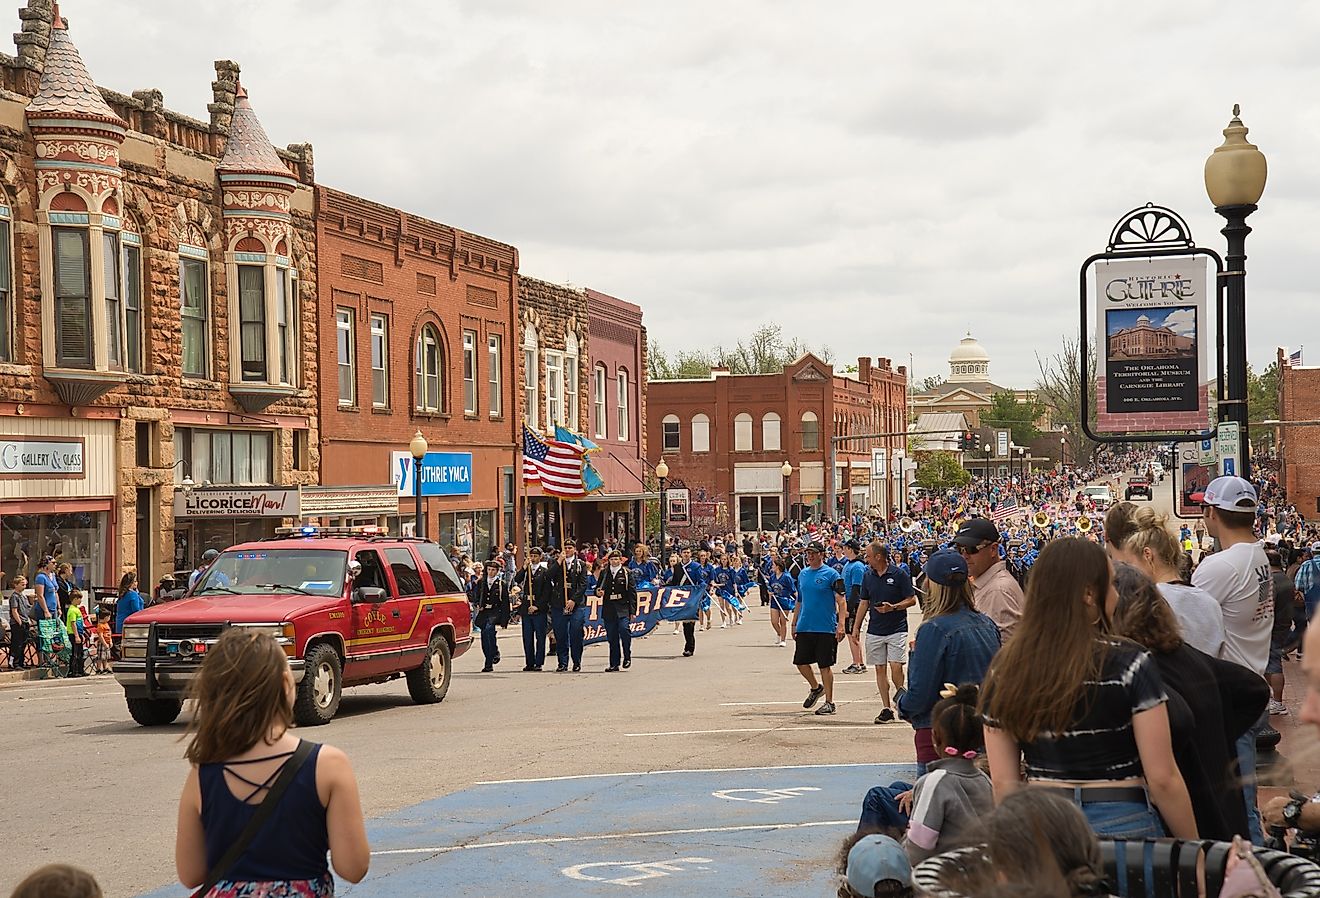 Downtown festival in Guthrie, Oklahoma. Image credit Andreas Stroh via Shutterstock